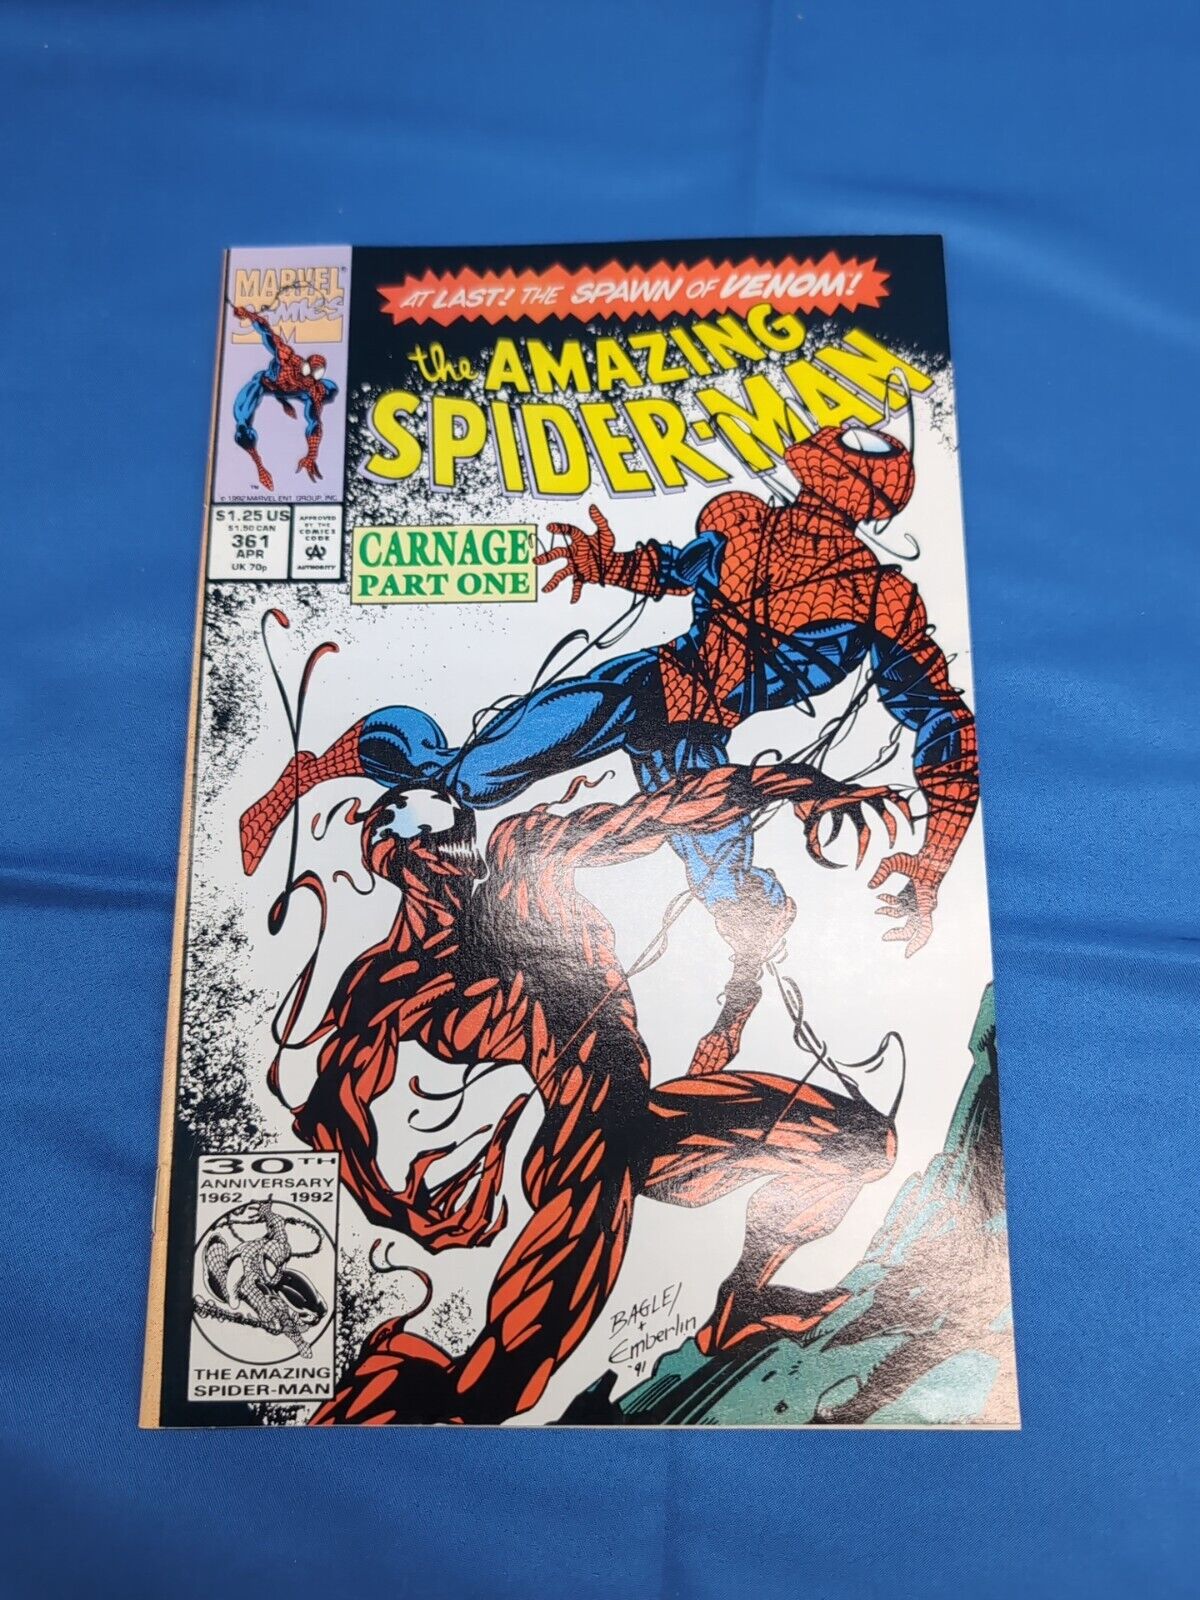 The Amazing Spider-Man #361 (Marvel, April 1992) 30th Anniversary Carnage Part 1